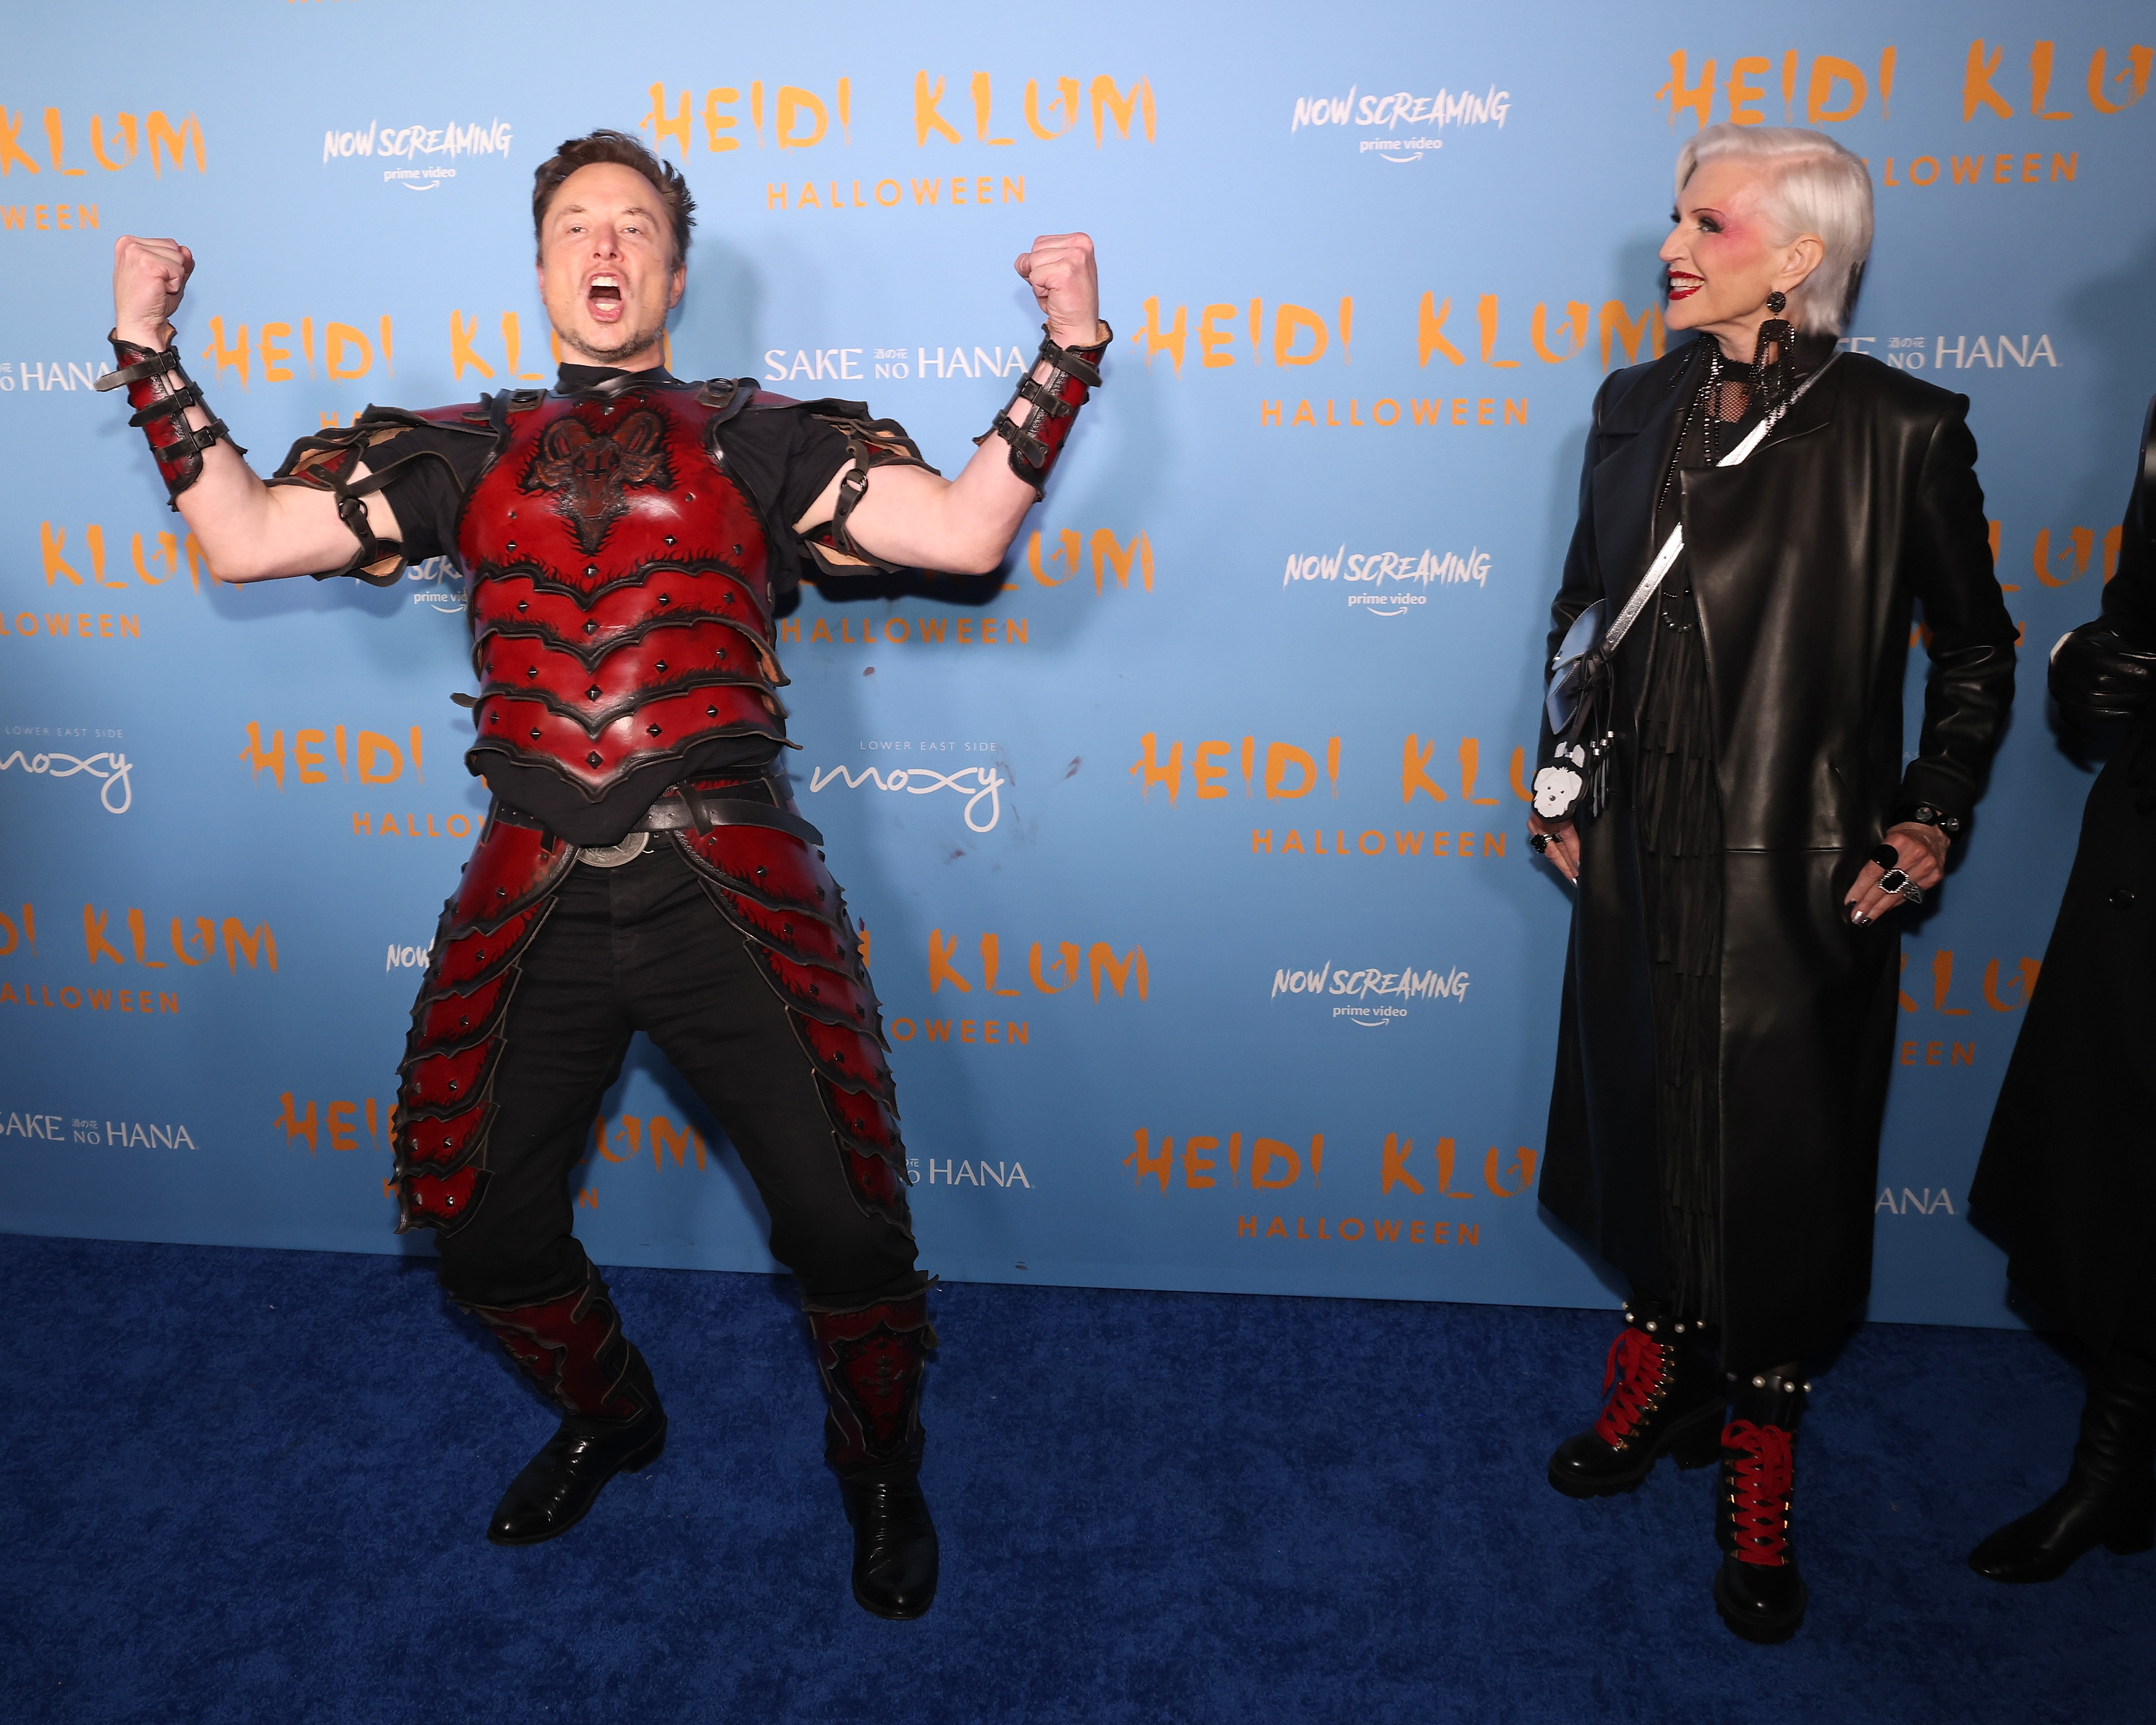 Elon Musk and his mom doing some uncanny shit in costume at Heidi Klum's Halloween party.